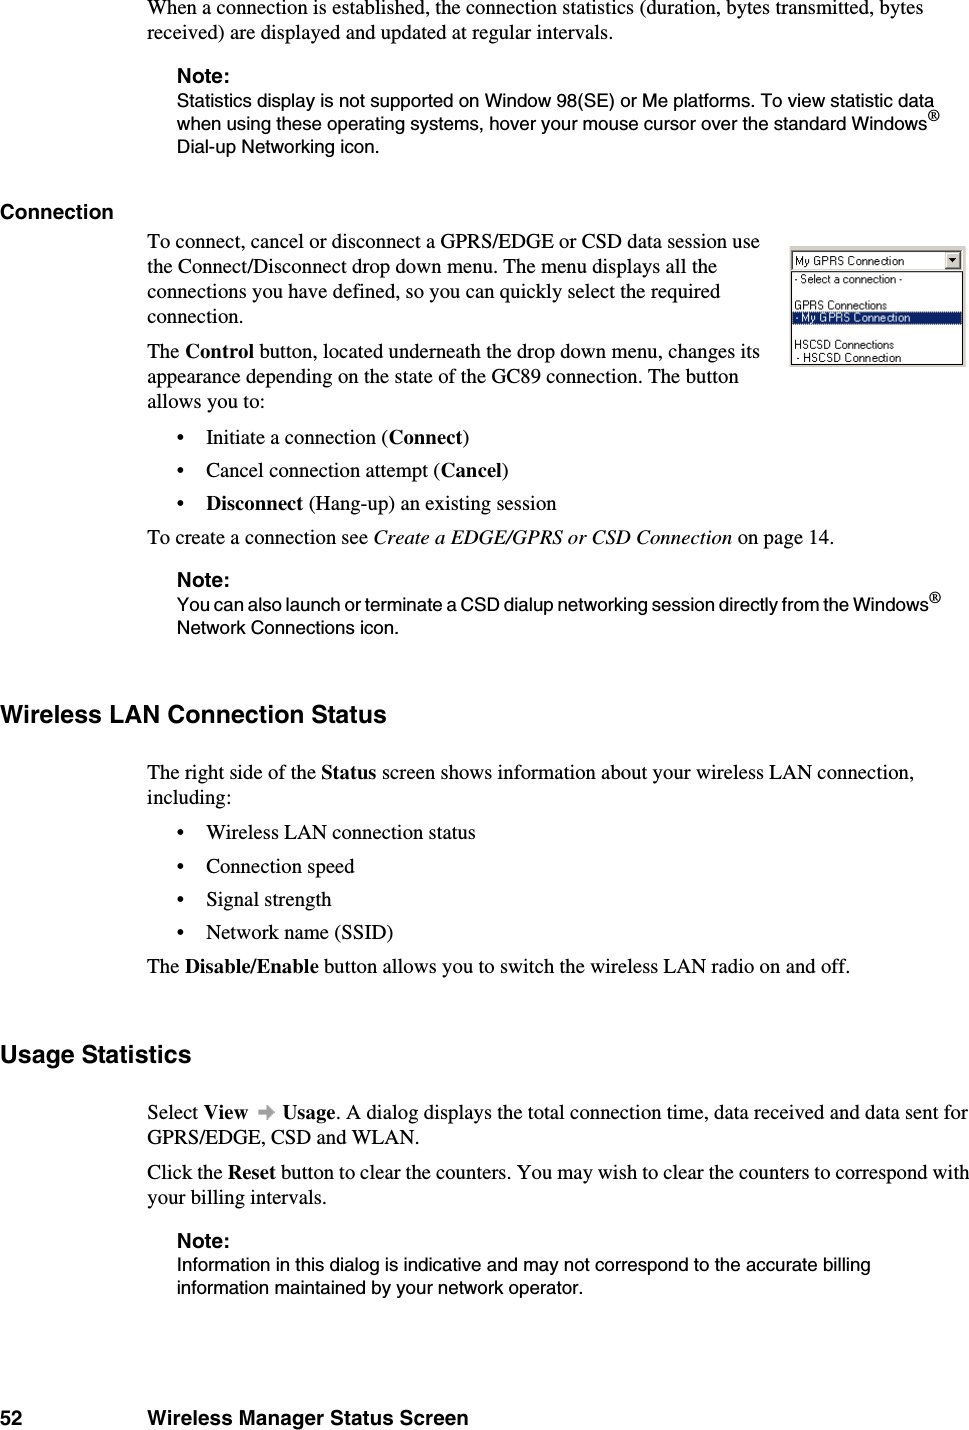 52 Wireless Manager Status ScreenWhen a connection is established, the connection statistics (duration, bytes transmitted, bytes received) are displayed and updated at regular intervals.Note:Statistics display is not supported on Window 98(SE) or Me platforms. To view statistic data when using these operating systems, hover your mouse cursor over the standard Windows® Dial-up Networking icon.ConnectionTo connect, cancel or disconnect a GPRS/EDGE or CSD data session use the Connect/Disconnect drop down menu. The menu displays all the connections you have defined, so you can quickly select the required connection. The Control button, located underneath the drop down menu, changes its appearance depending on the state of the GC89 connection. The button allows you to:• Initiate a connection (Connect)• Cancel connection attempt (Cancel)•Disconnect (Hang-up) an existing sessionTo create a connection see Create a EDGE/GPRS or CSD Connection on page 14.Note:You can also launch or terminate a CSD dialup networking session directly from the Windows® Network Connections icon. Wireless LAN Connection StatusThe right side of the Status screen shows information about your wireless LAN connection, including:• Wireless LAN connection status• Connection speed• Signal strength• Network name (SSID)The Disable/Enable button allows you to switch the wireless LAN radio on and off.Usage StatisticsSelect View  Usage. A dialog displays the total connection time, data received and data sent for GPRS/EDGE, CSD and WLAN.Click the Reset button to clear the counters. You may wish to clear the counters to correspond with your billing intervals.Note:Information in this dialog is indicative and may not correspond to the accurate billing information maintained by your network operator.